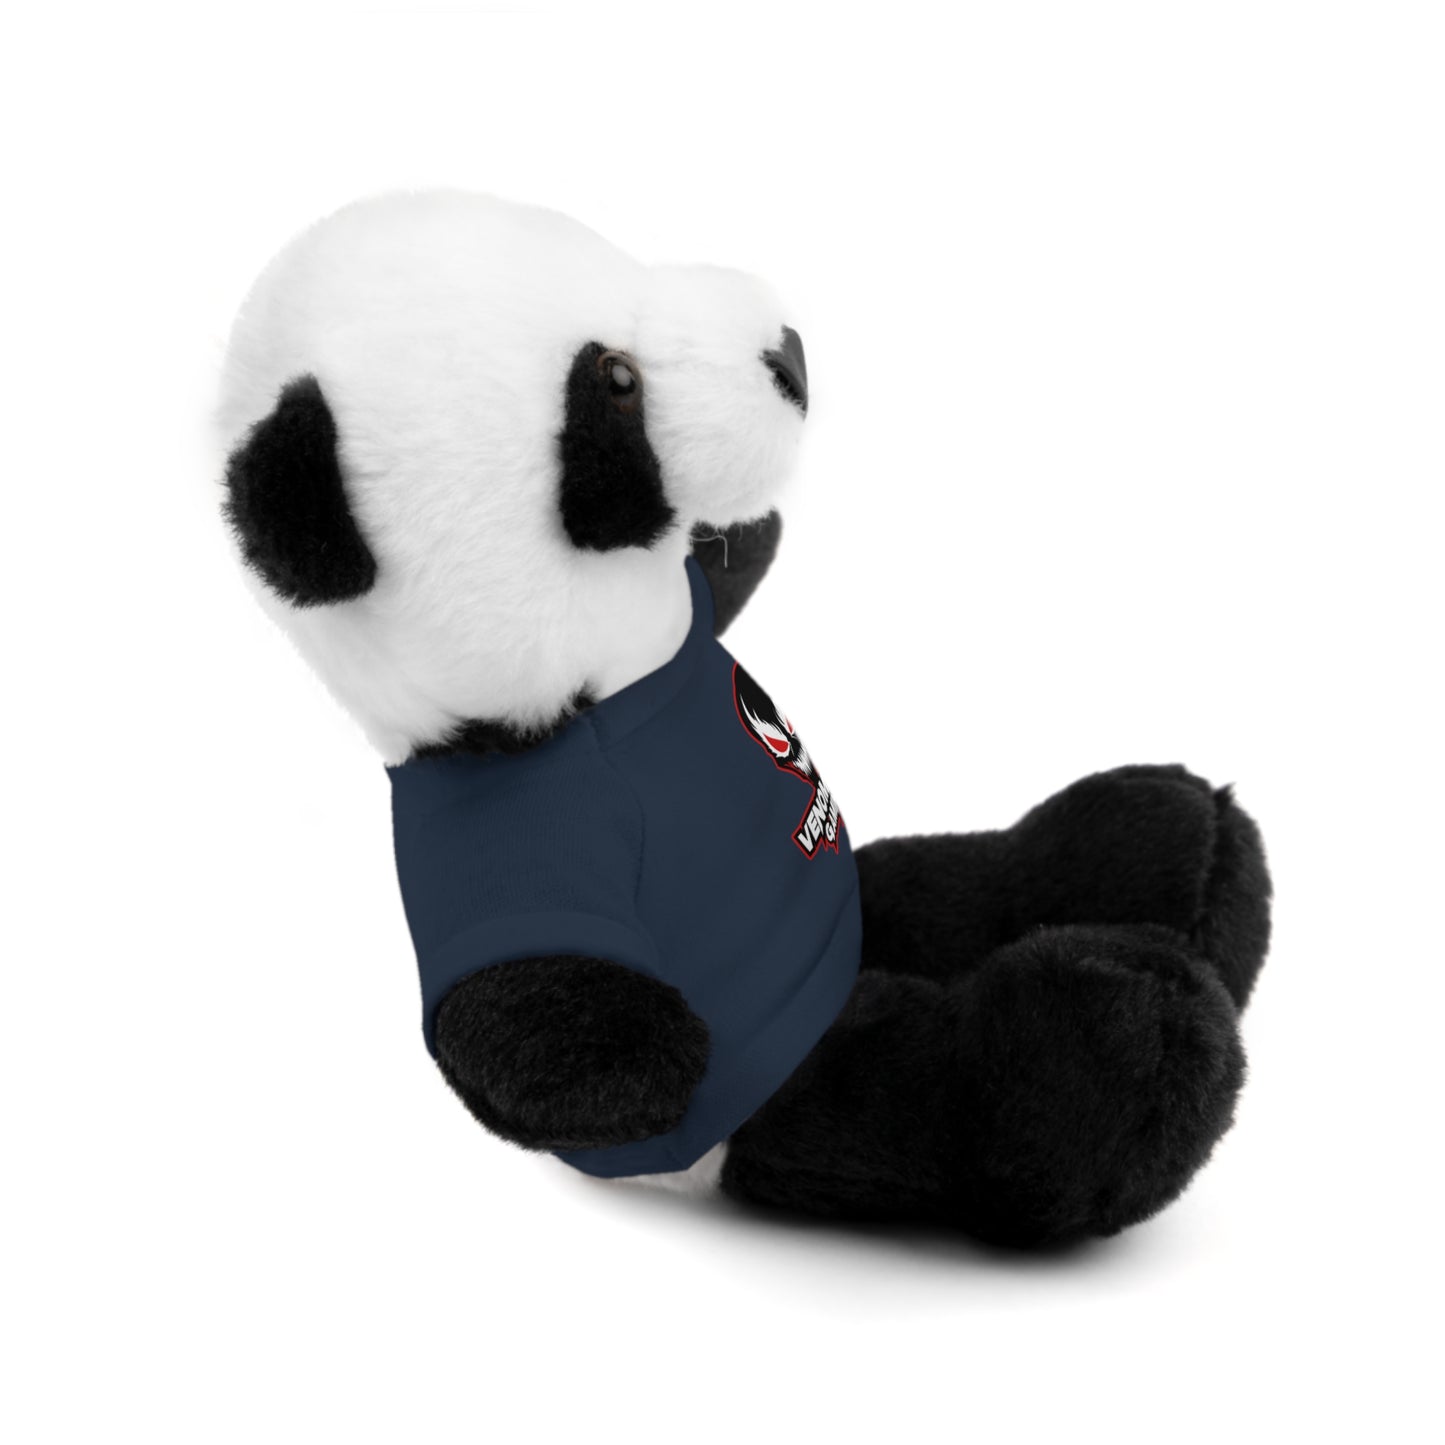 Venomized Gaming Stuffed Animals with Tee